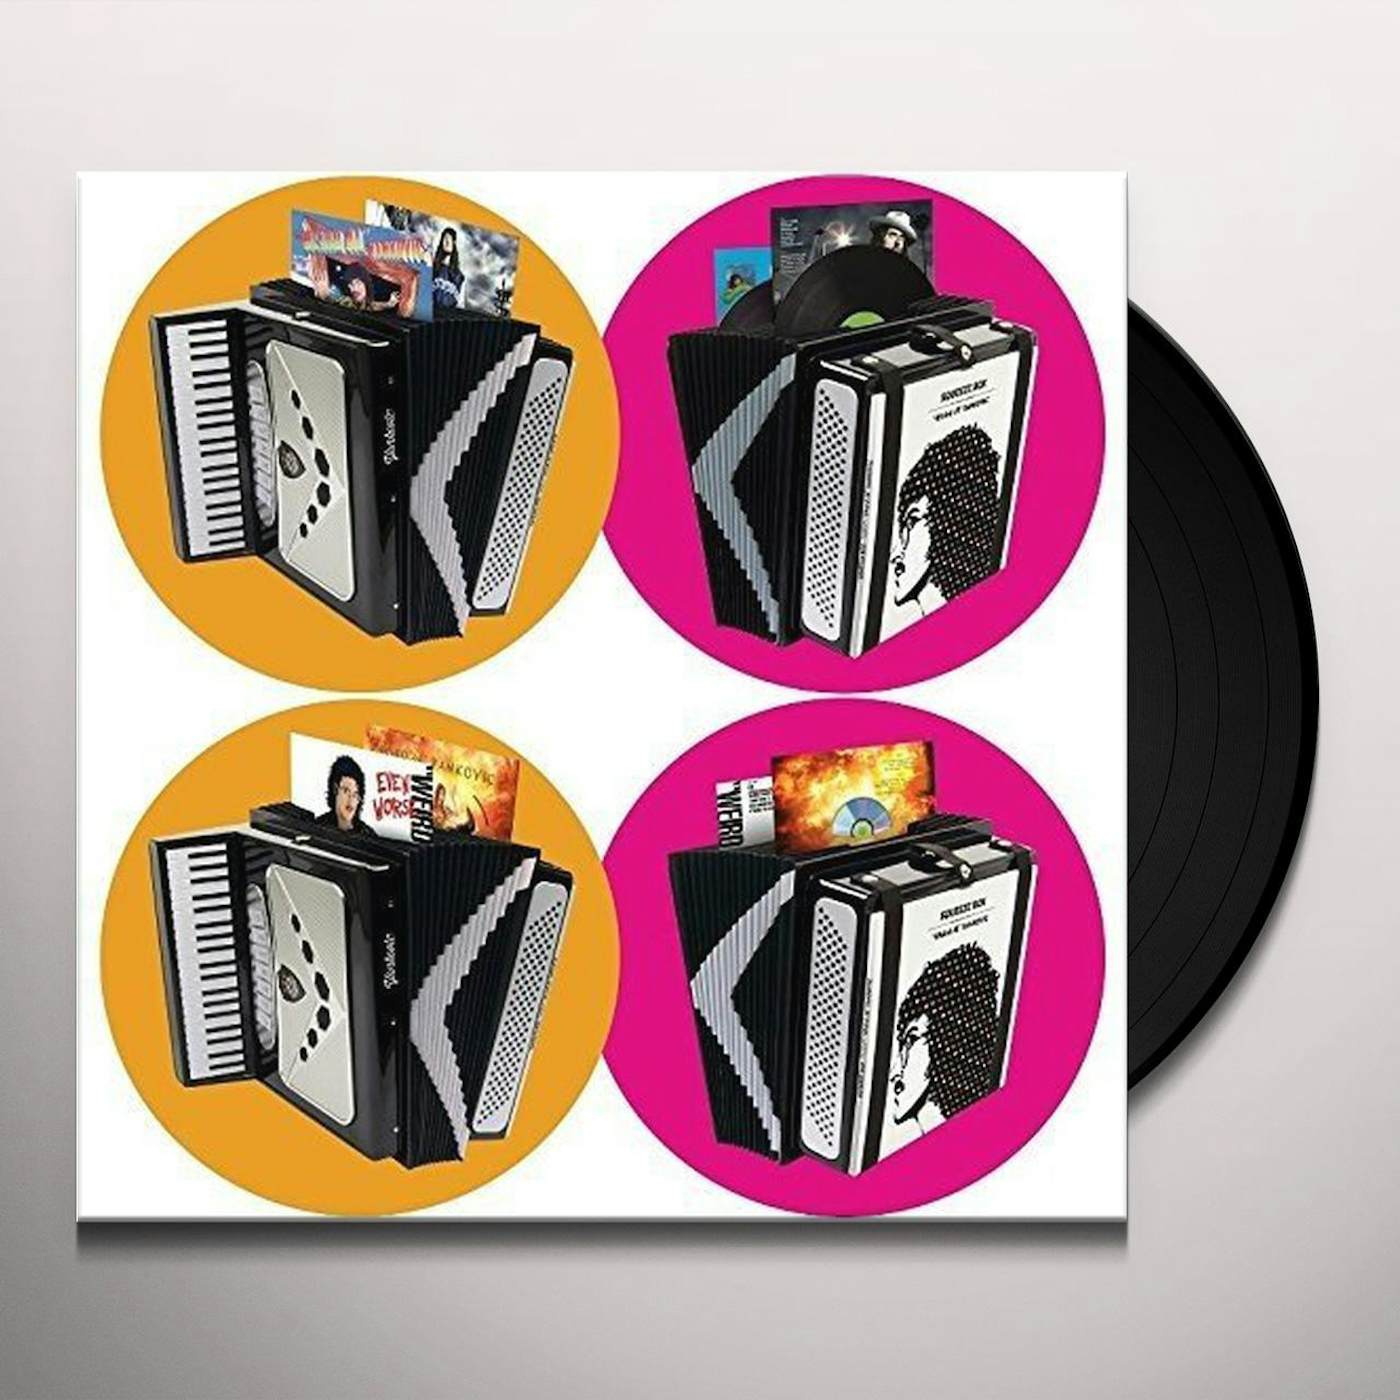 SQUEEZE BOX: COMPLETE WORKS OF "Weird Al" Yankovic Vinyl Record